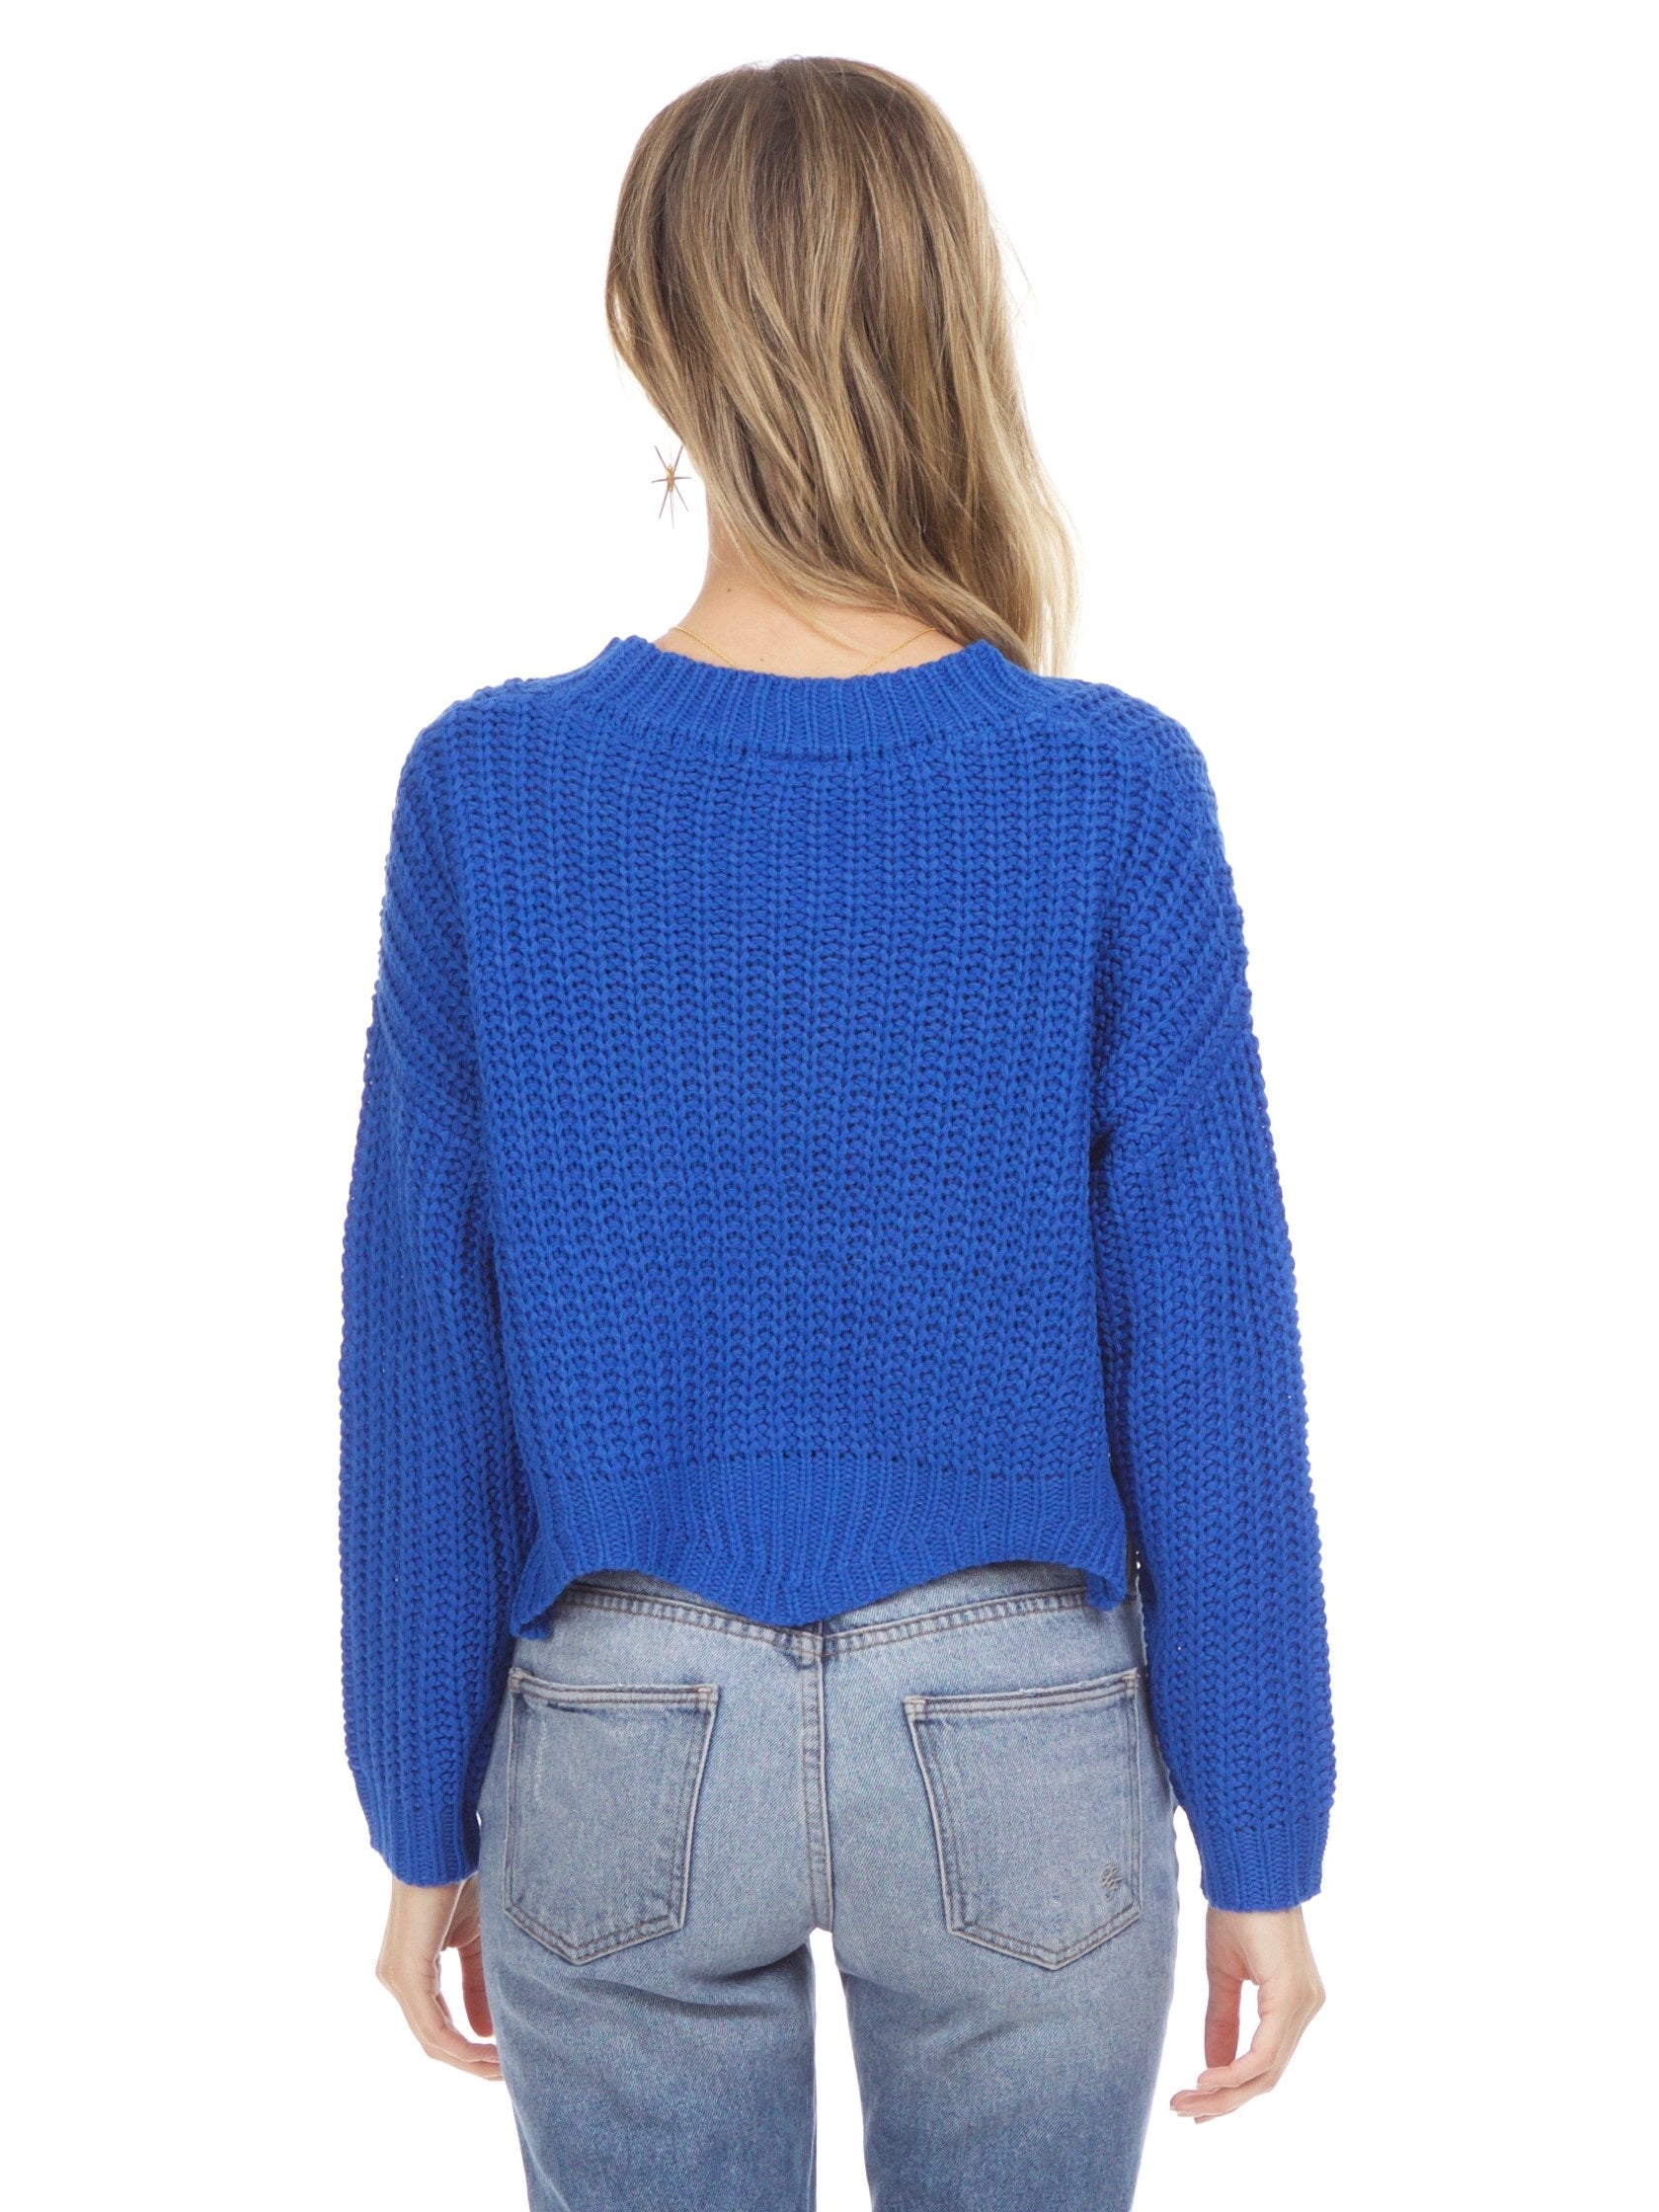 Women outfit in a sweater rental from Sadie & Sage called Scallop Hem Knit Sweater